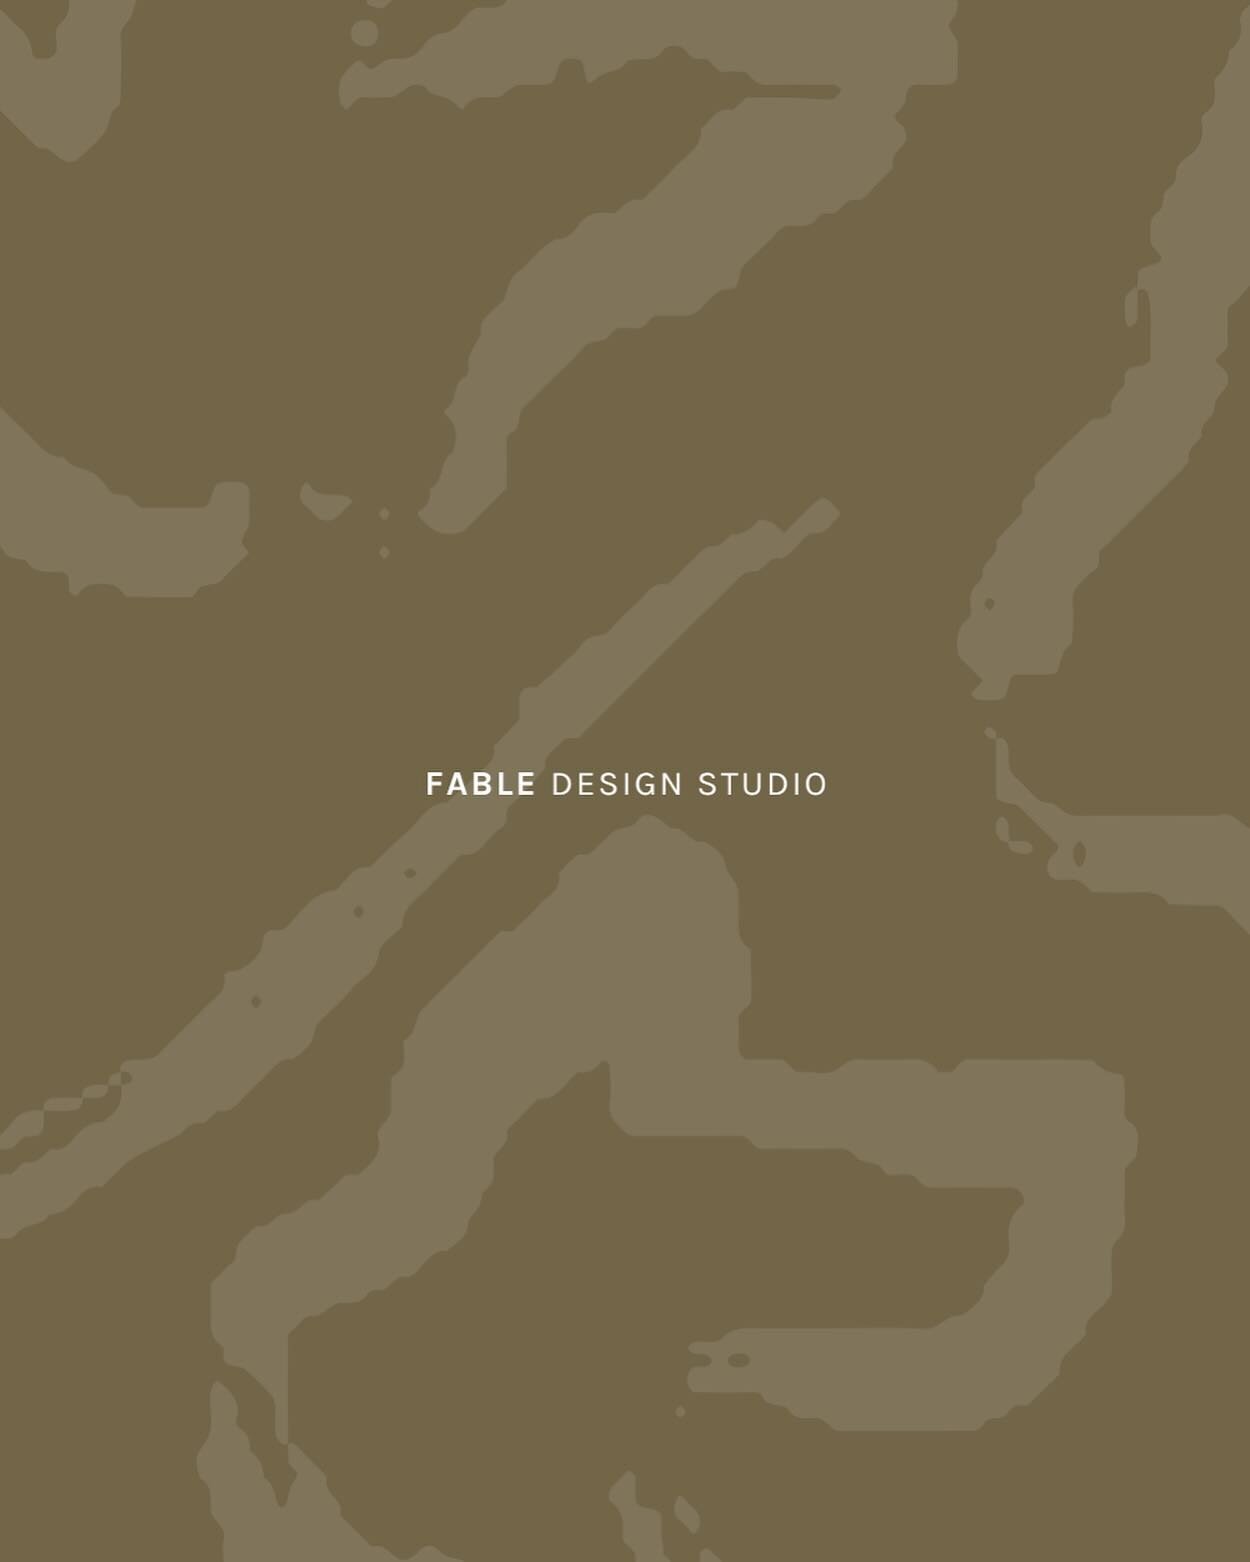 We&rsquo;re back!✨

SL Studio is now Fable Design Studio.

Over the past few years, major life transitions led to business transitions and this rebrand has been in the works for some time. We&rsquo;re so excited for this fresh start and to create bea